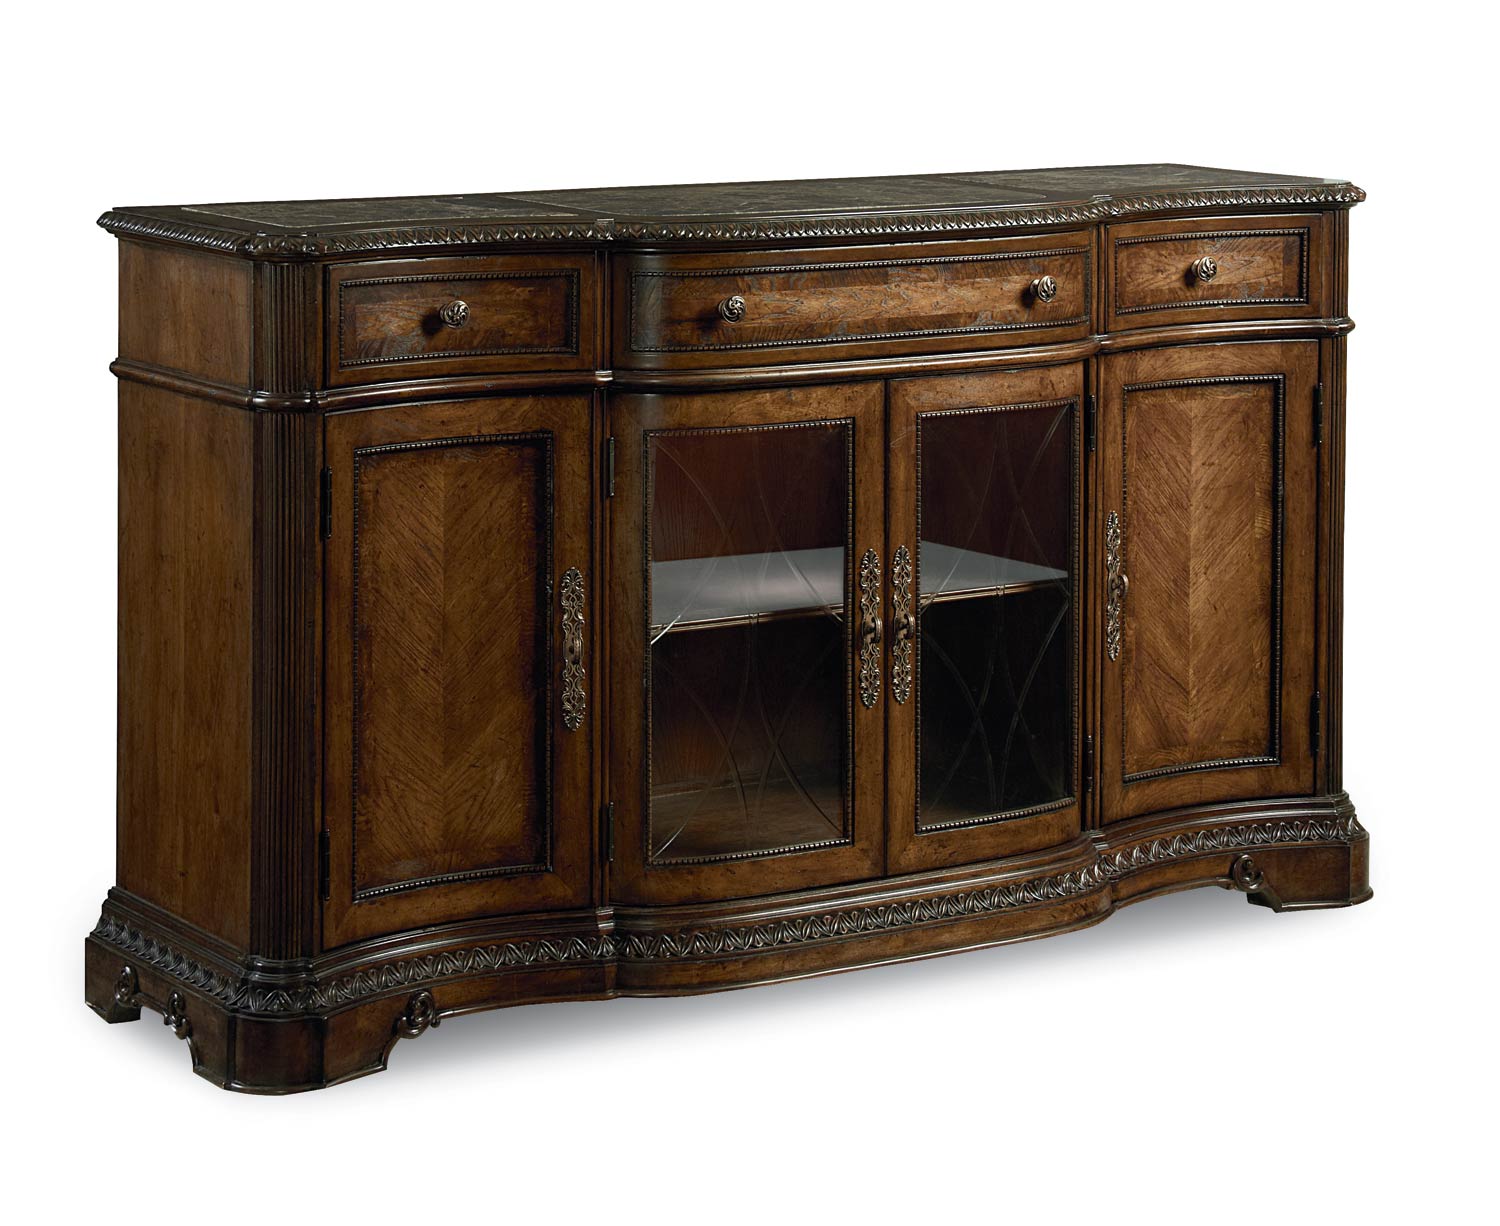 Legacy Classic Pemberleigh Credenza - Brandy/Burnished Edges